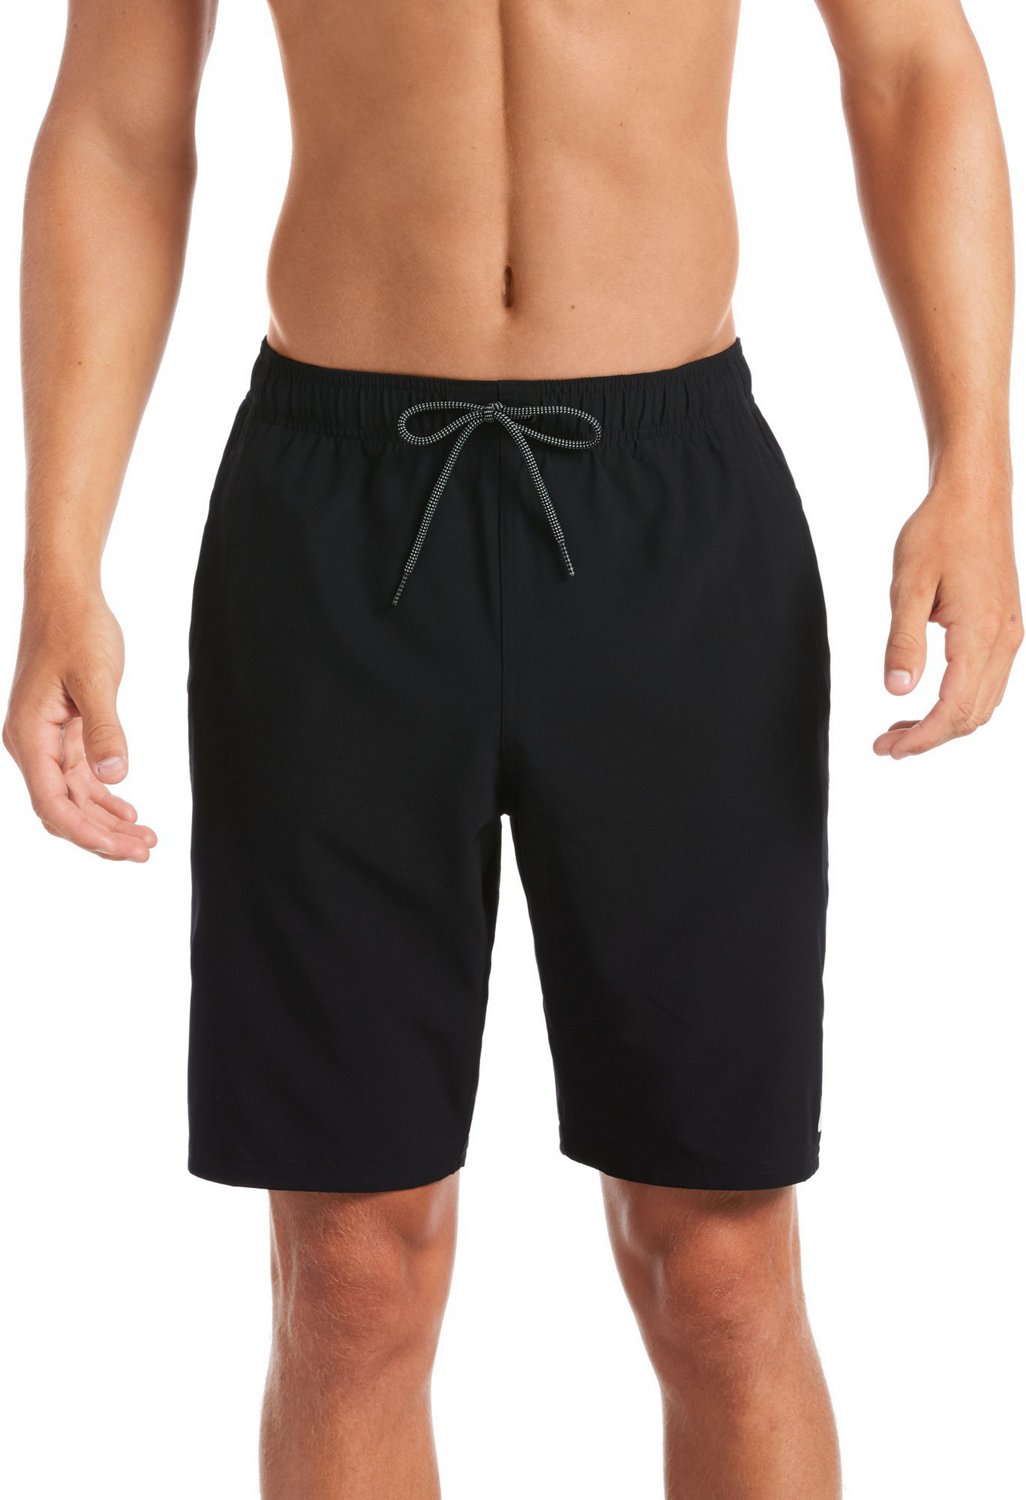 Nike Men's Contend Volley Board Shorts | Free Shipping at Academy